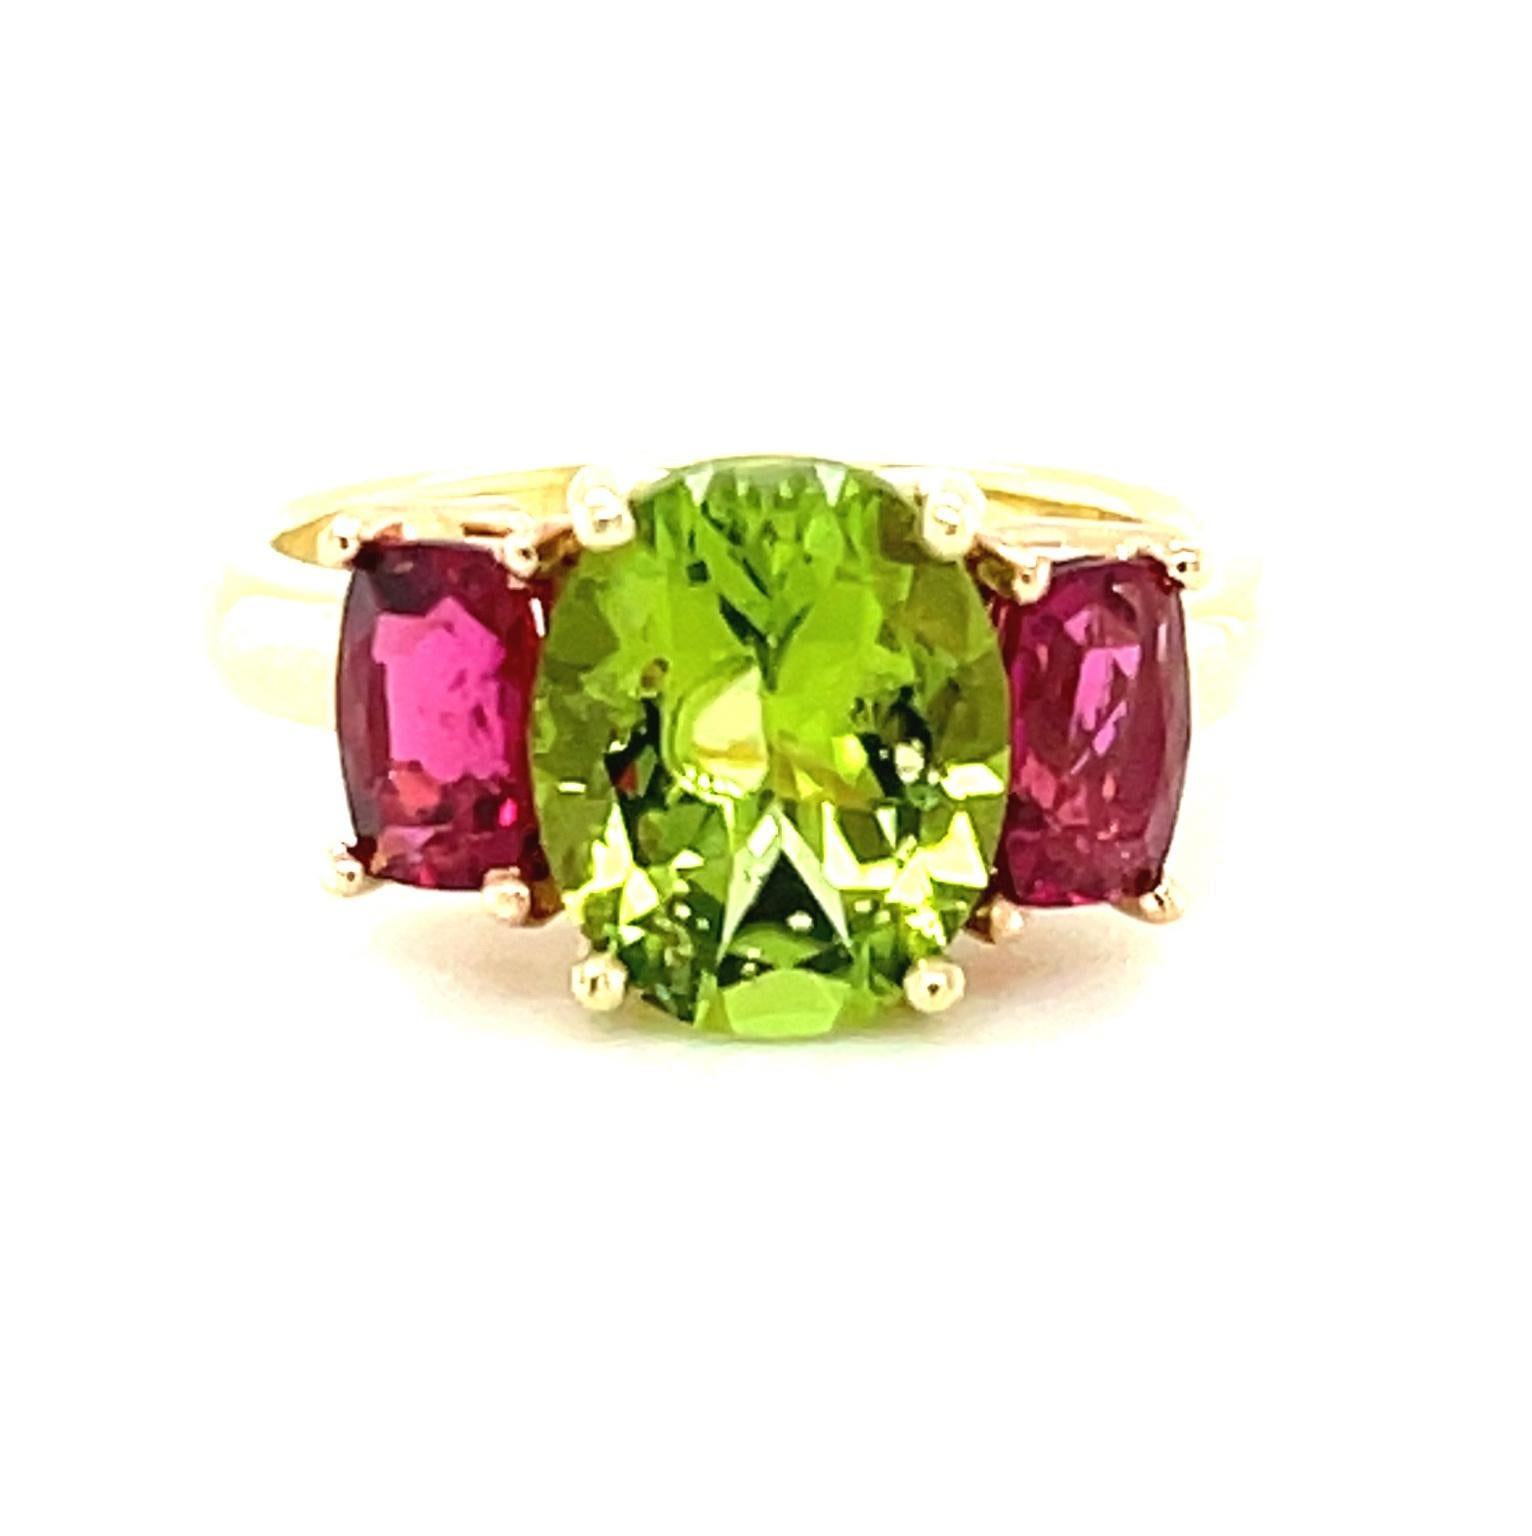 Featuring a bright and cheerful pairing of spring green peridot and vibrant fuchsia-pink tourmalines, this luscious ring is guaranteed to put a smile on your face! The peridot is a beautifully brilliant grass green oval weighing 2.73 carats and the